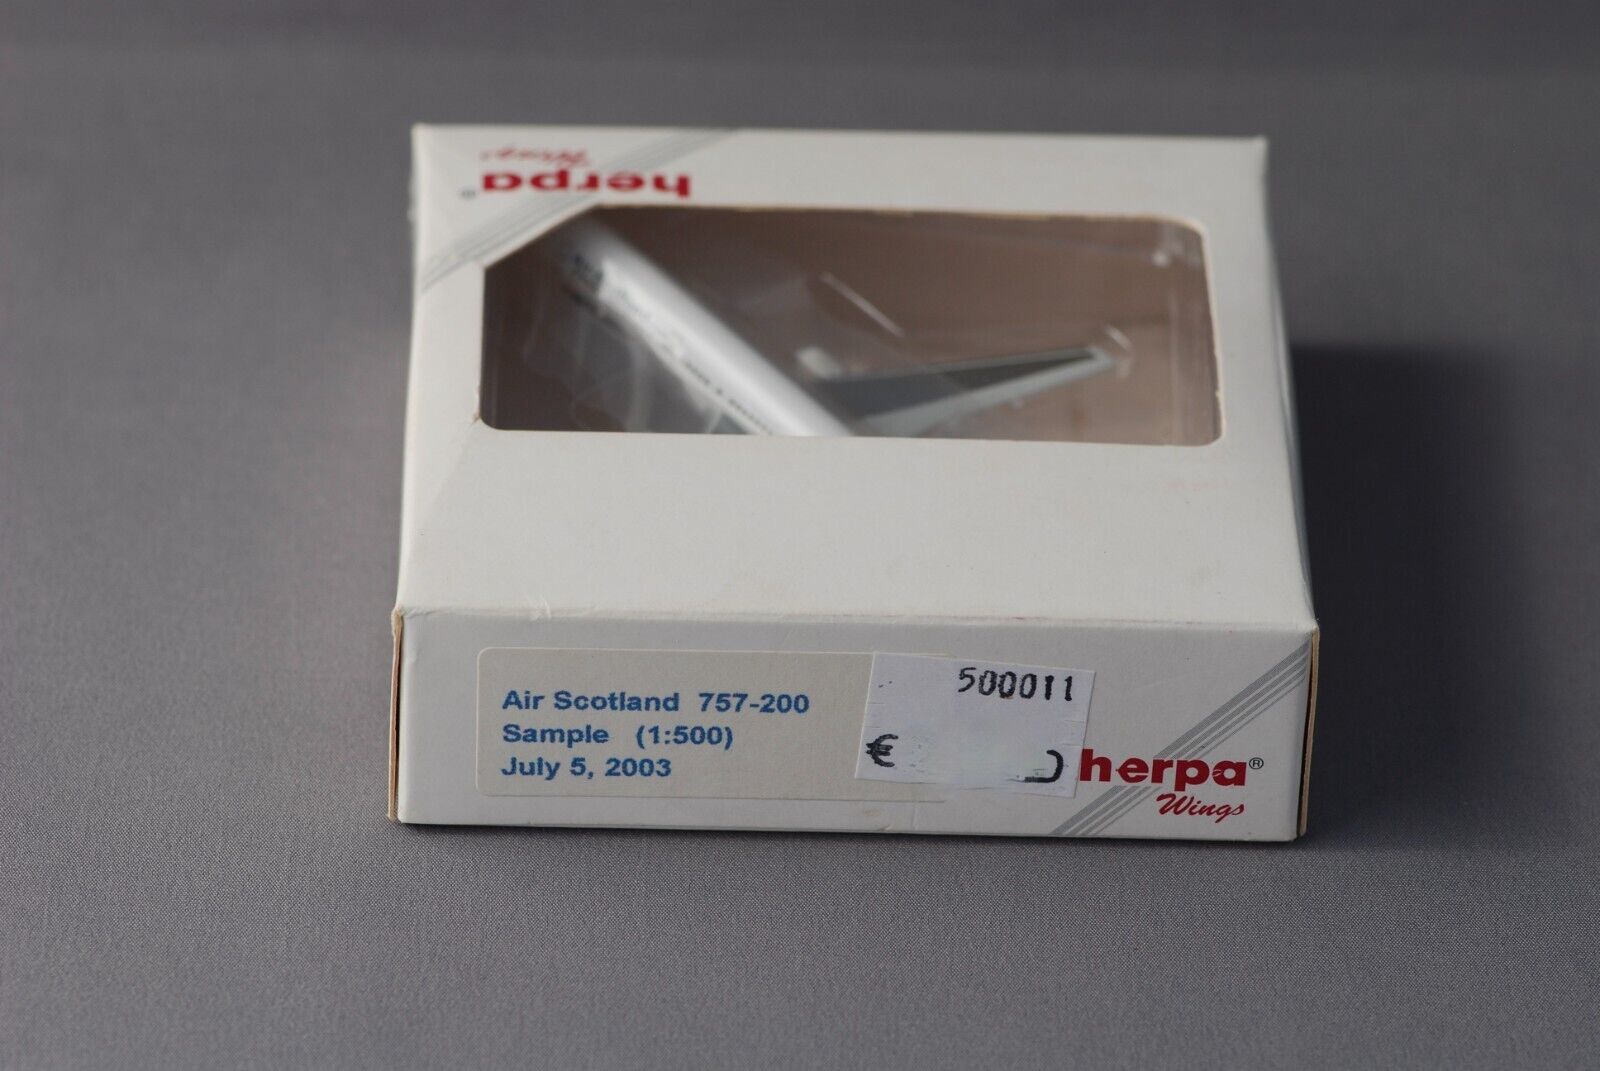 Air Scotland B757-200 SAMPLE, Herpa Wings 1:500, SX-BVN, never produced